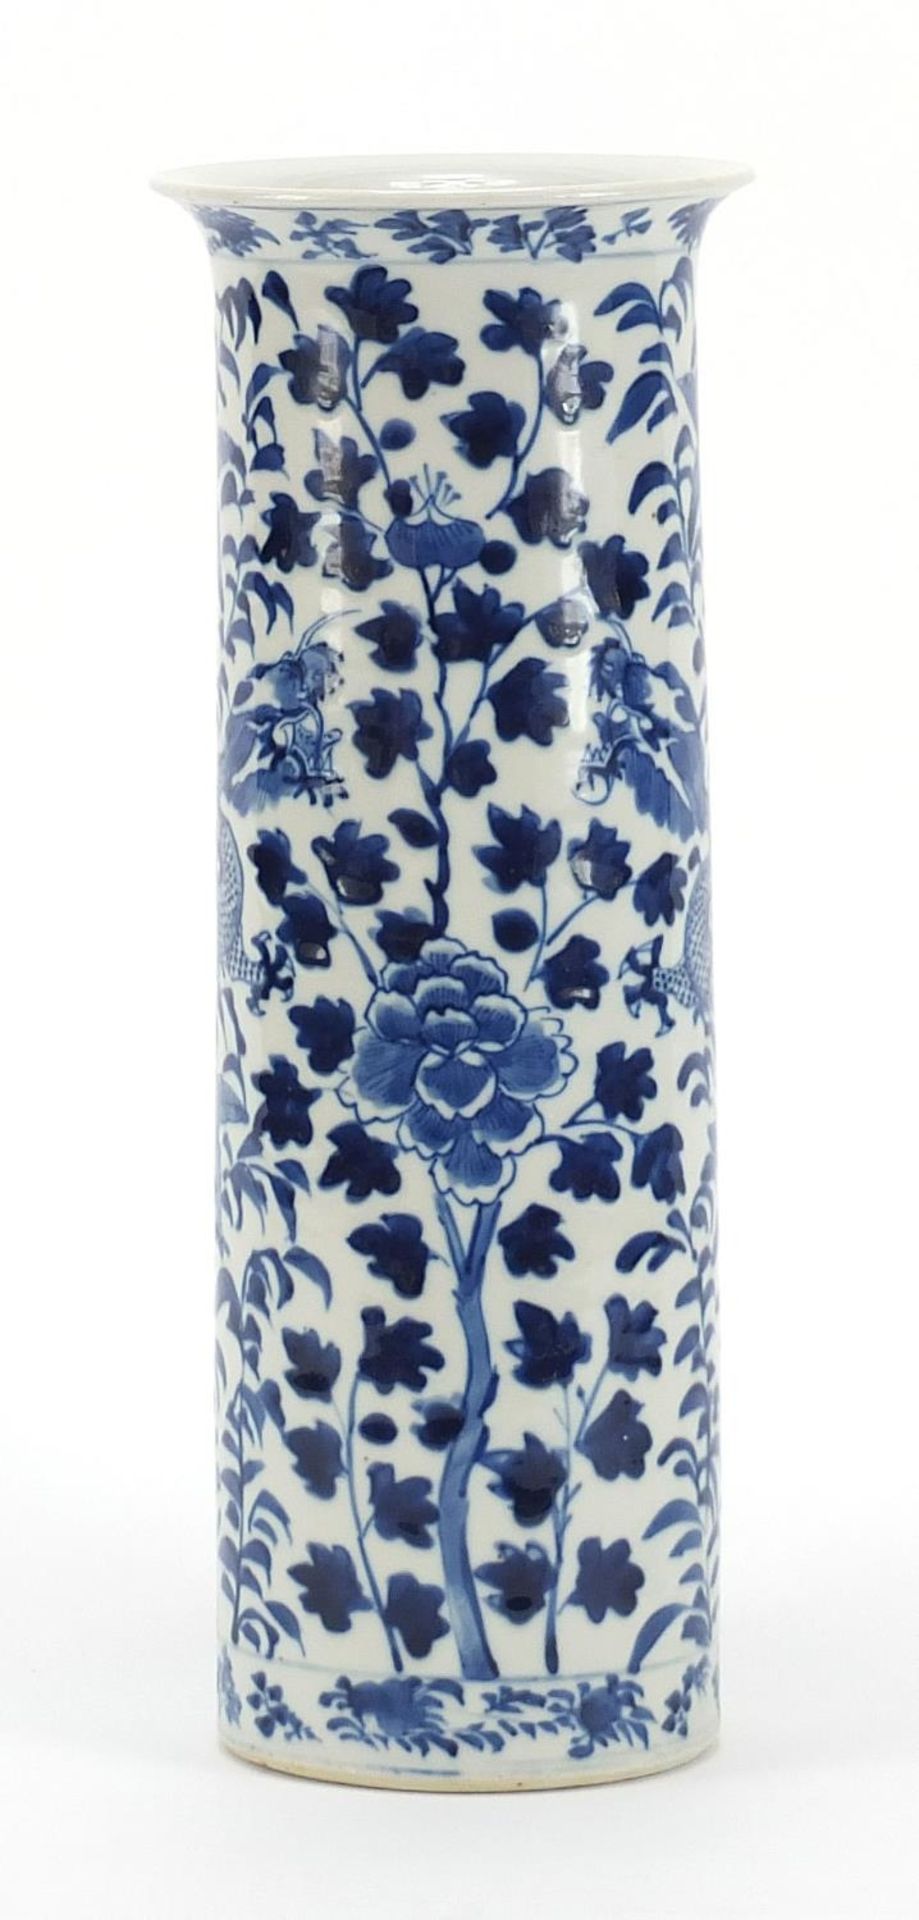 Large Chinese blue and white porcelain cylindrical vase hand painted with two dragons amongst